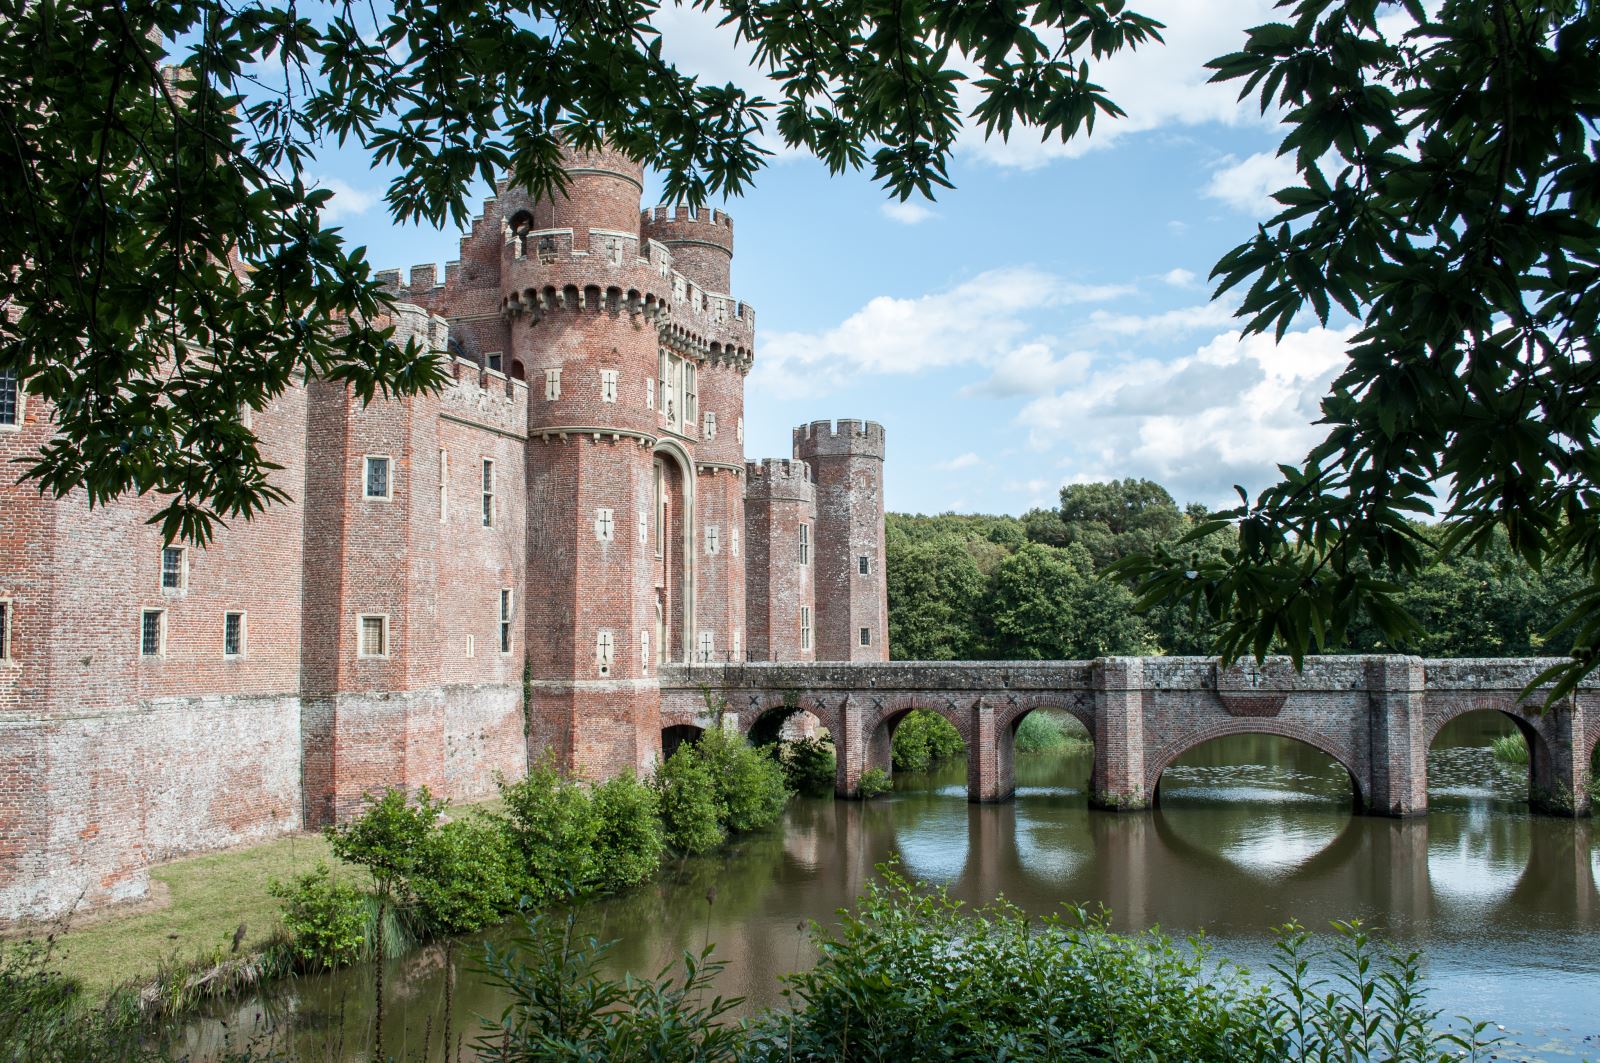 Herstmonceux Castle by Suzanne Jones of Sussex Bloggers